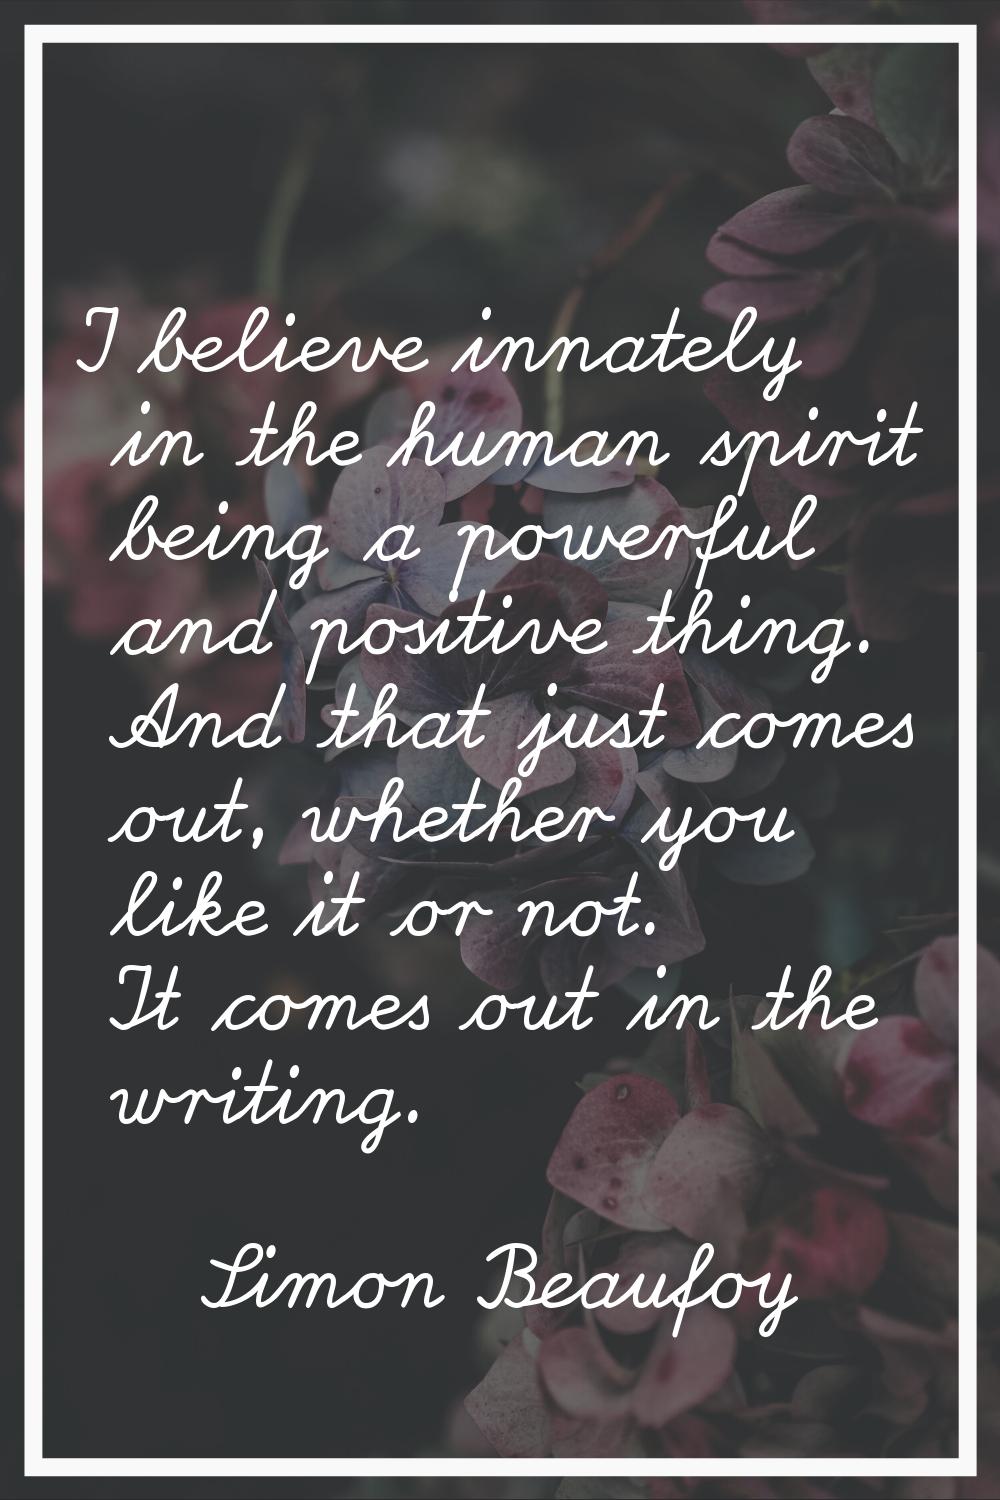 I believe innately in the human spirit being a powerful and positive thing. And that just comes out